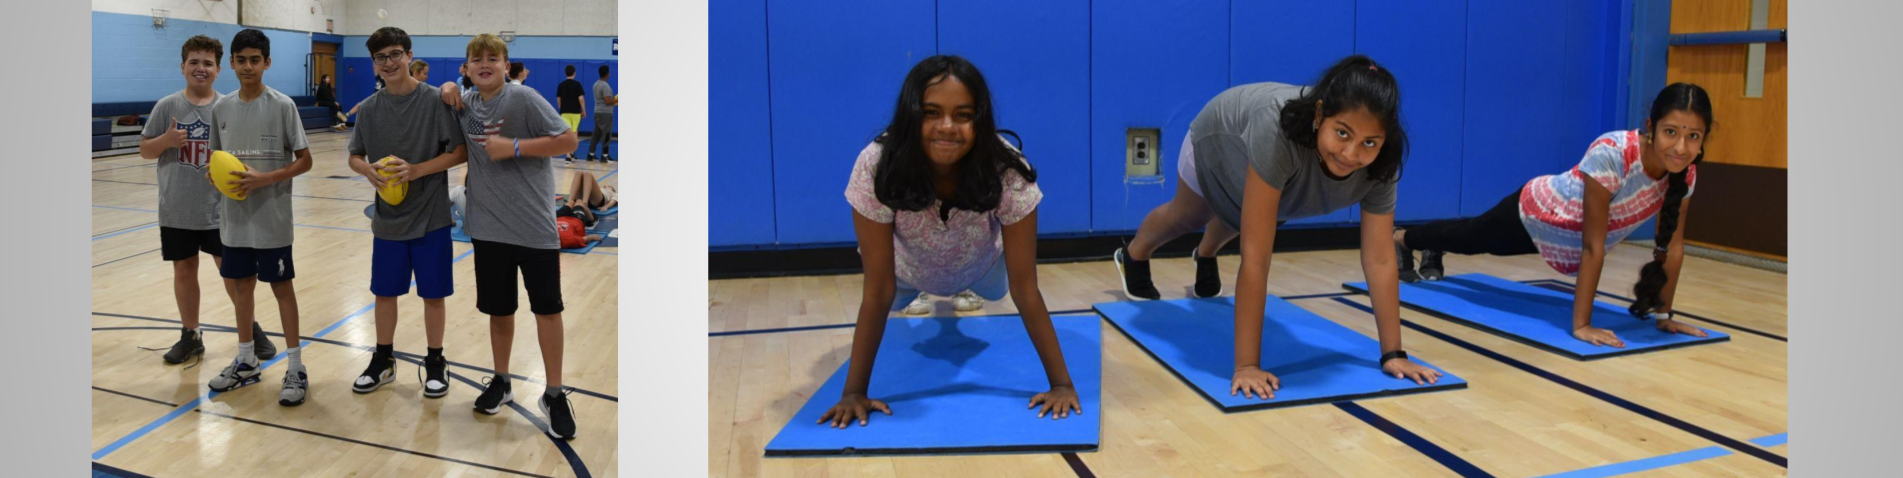 Students doing planks and posing for a photo in gym class